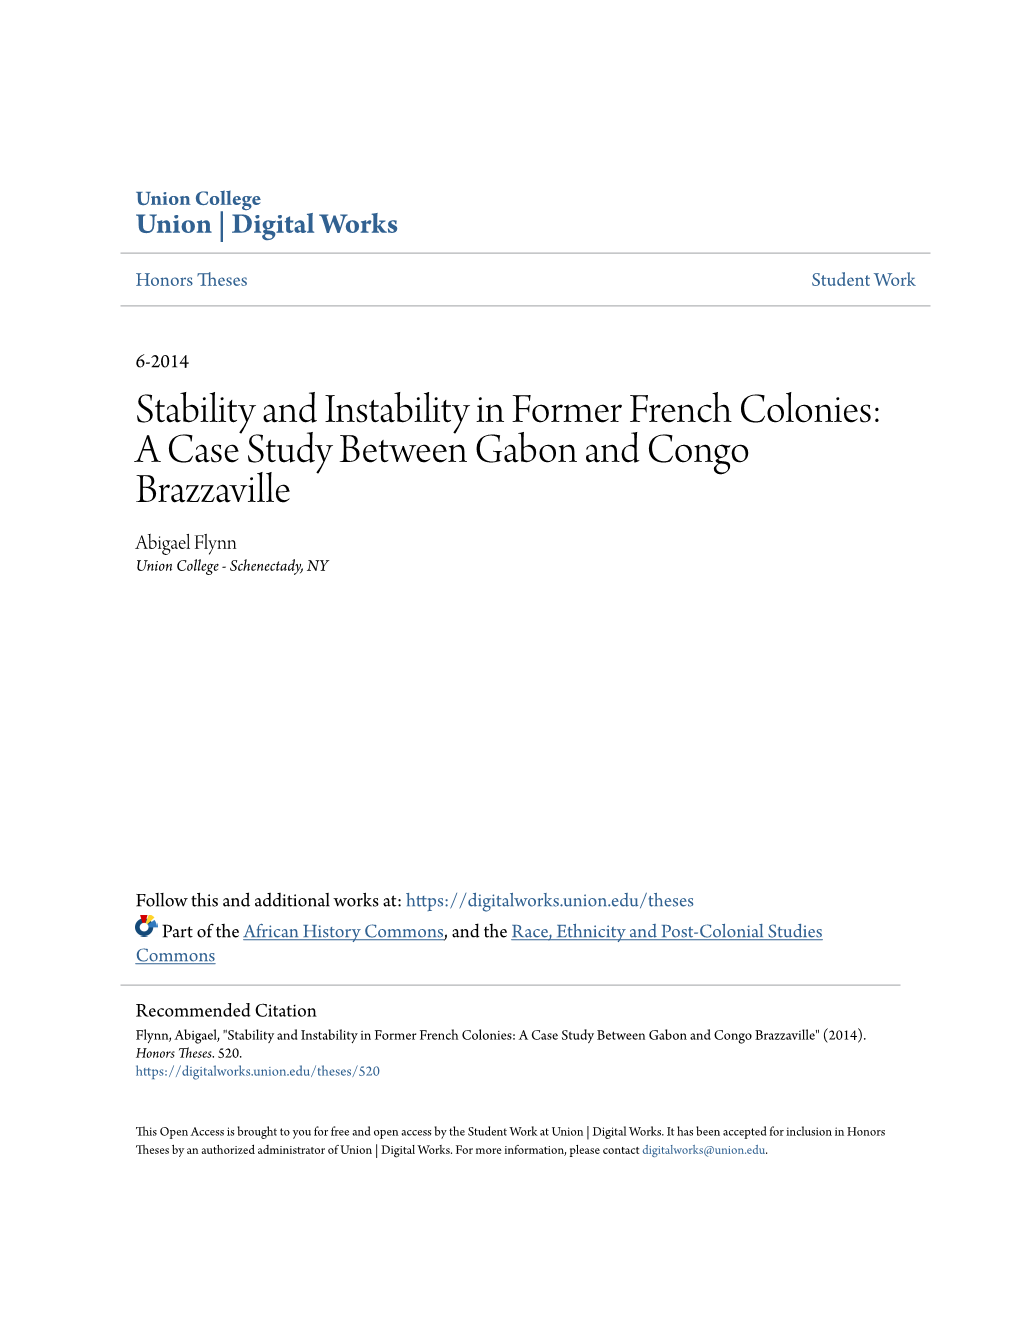 Stability and Instability in Former French Colonies: a Case Study Between Gabon and Congo Brazzaville Abigael Flynn Union College - Schenectady, NY